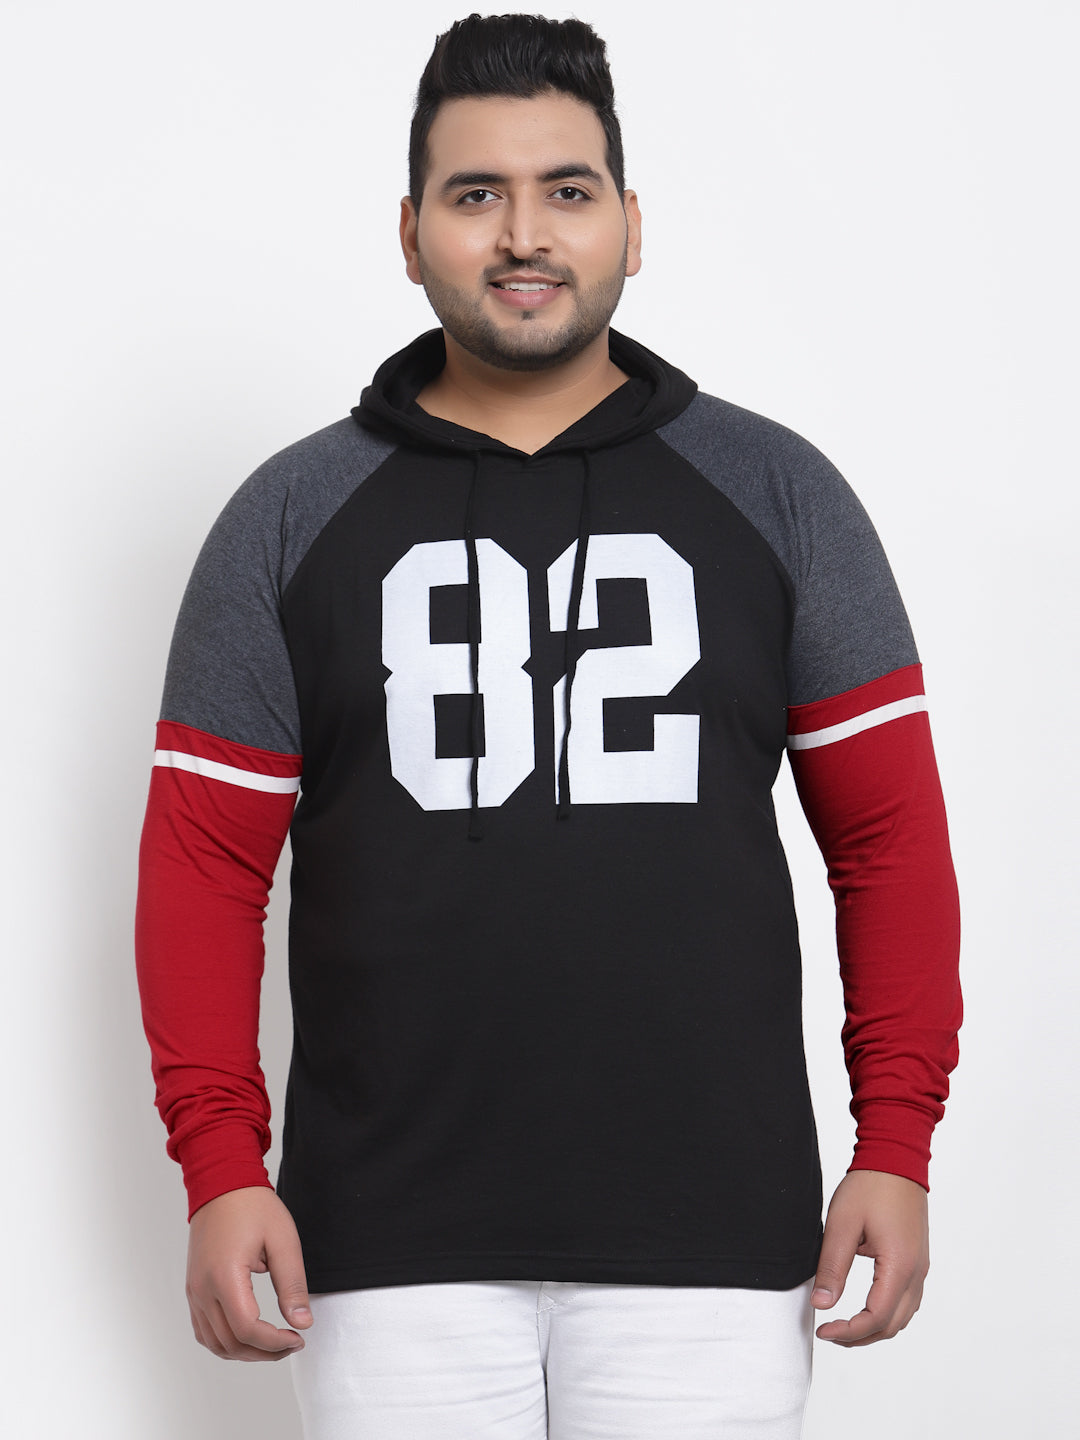 Plus Size Baseball Shirt - Black with Red Sleeves